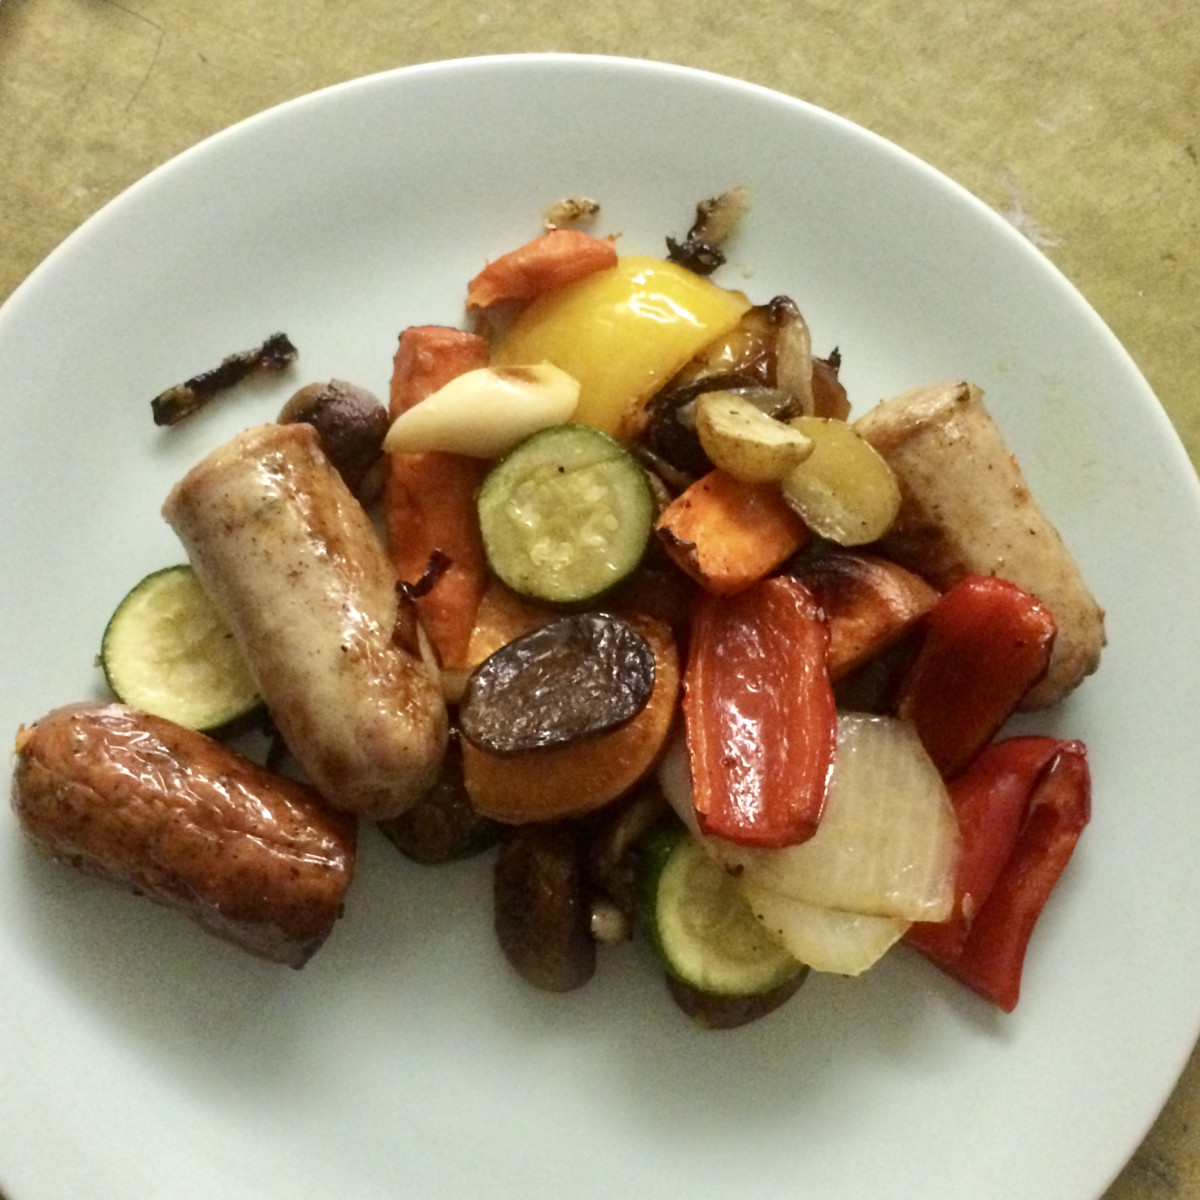 Roasted vegetables and sausage